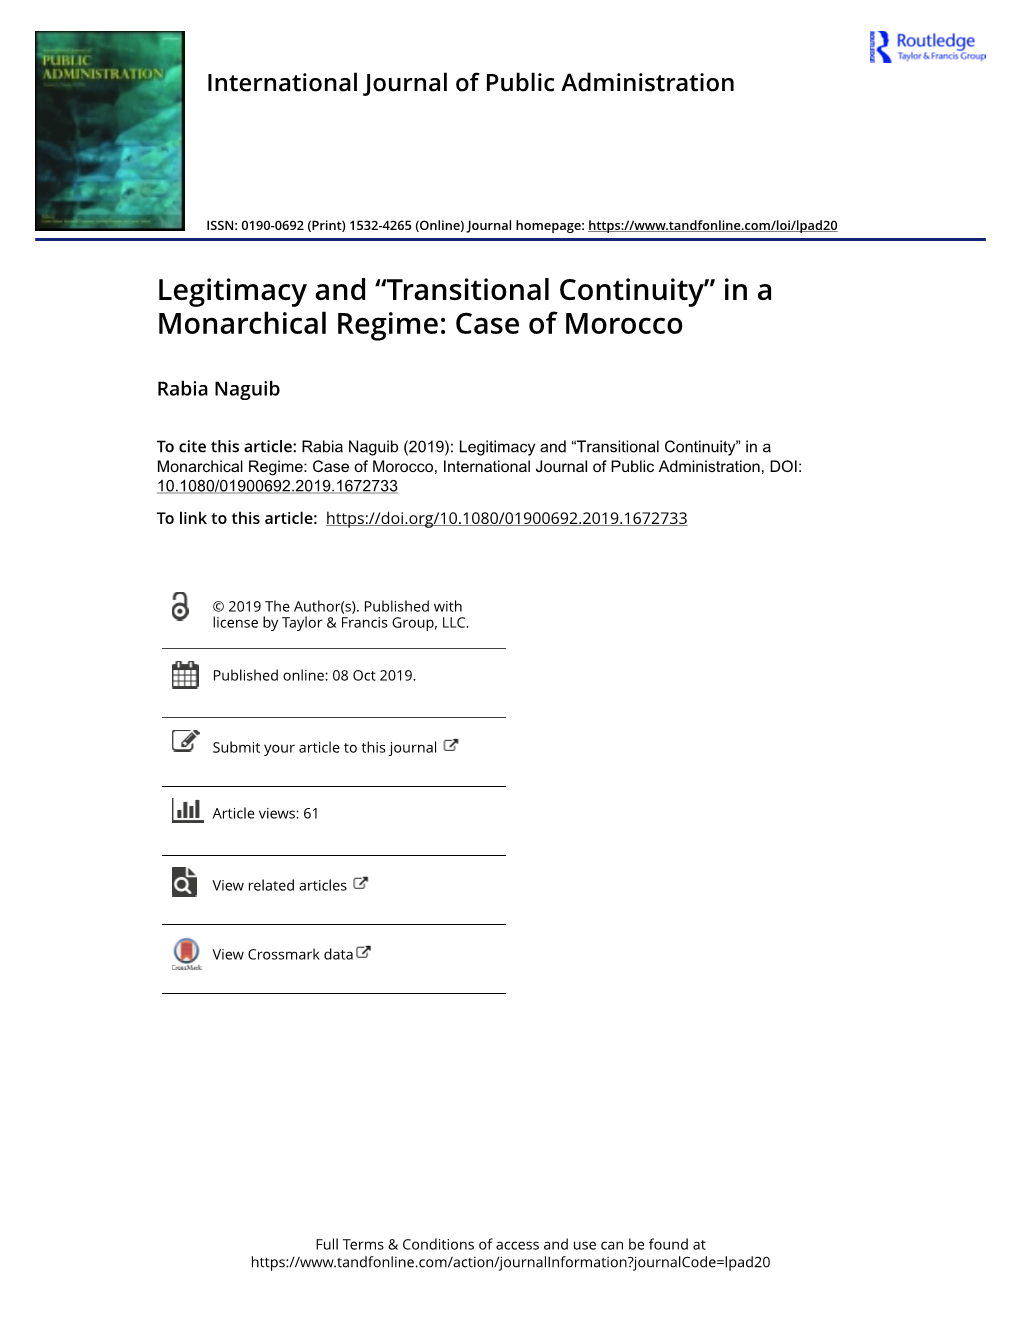 Legitimacy and “Transitional Continuity” in a Monarchical Regime: Case of Morocco